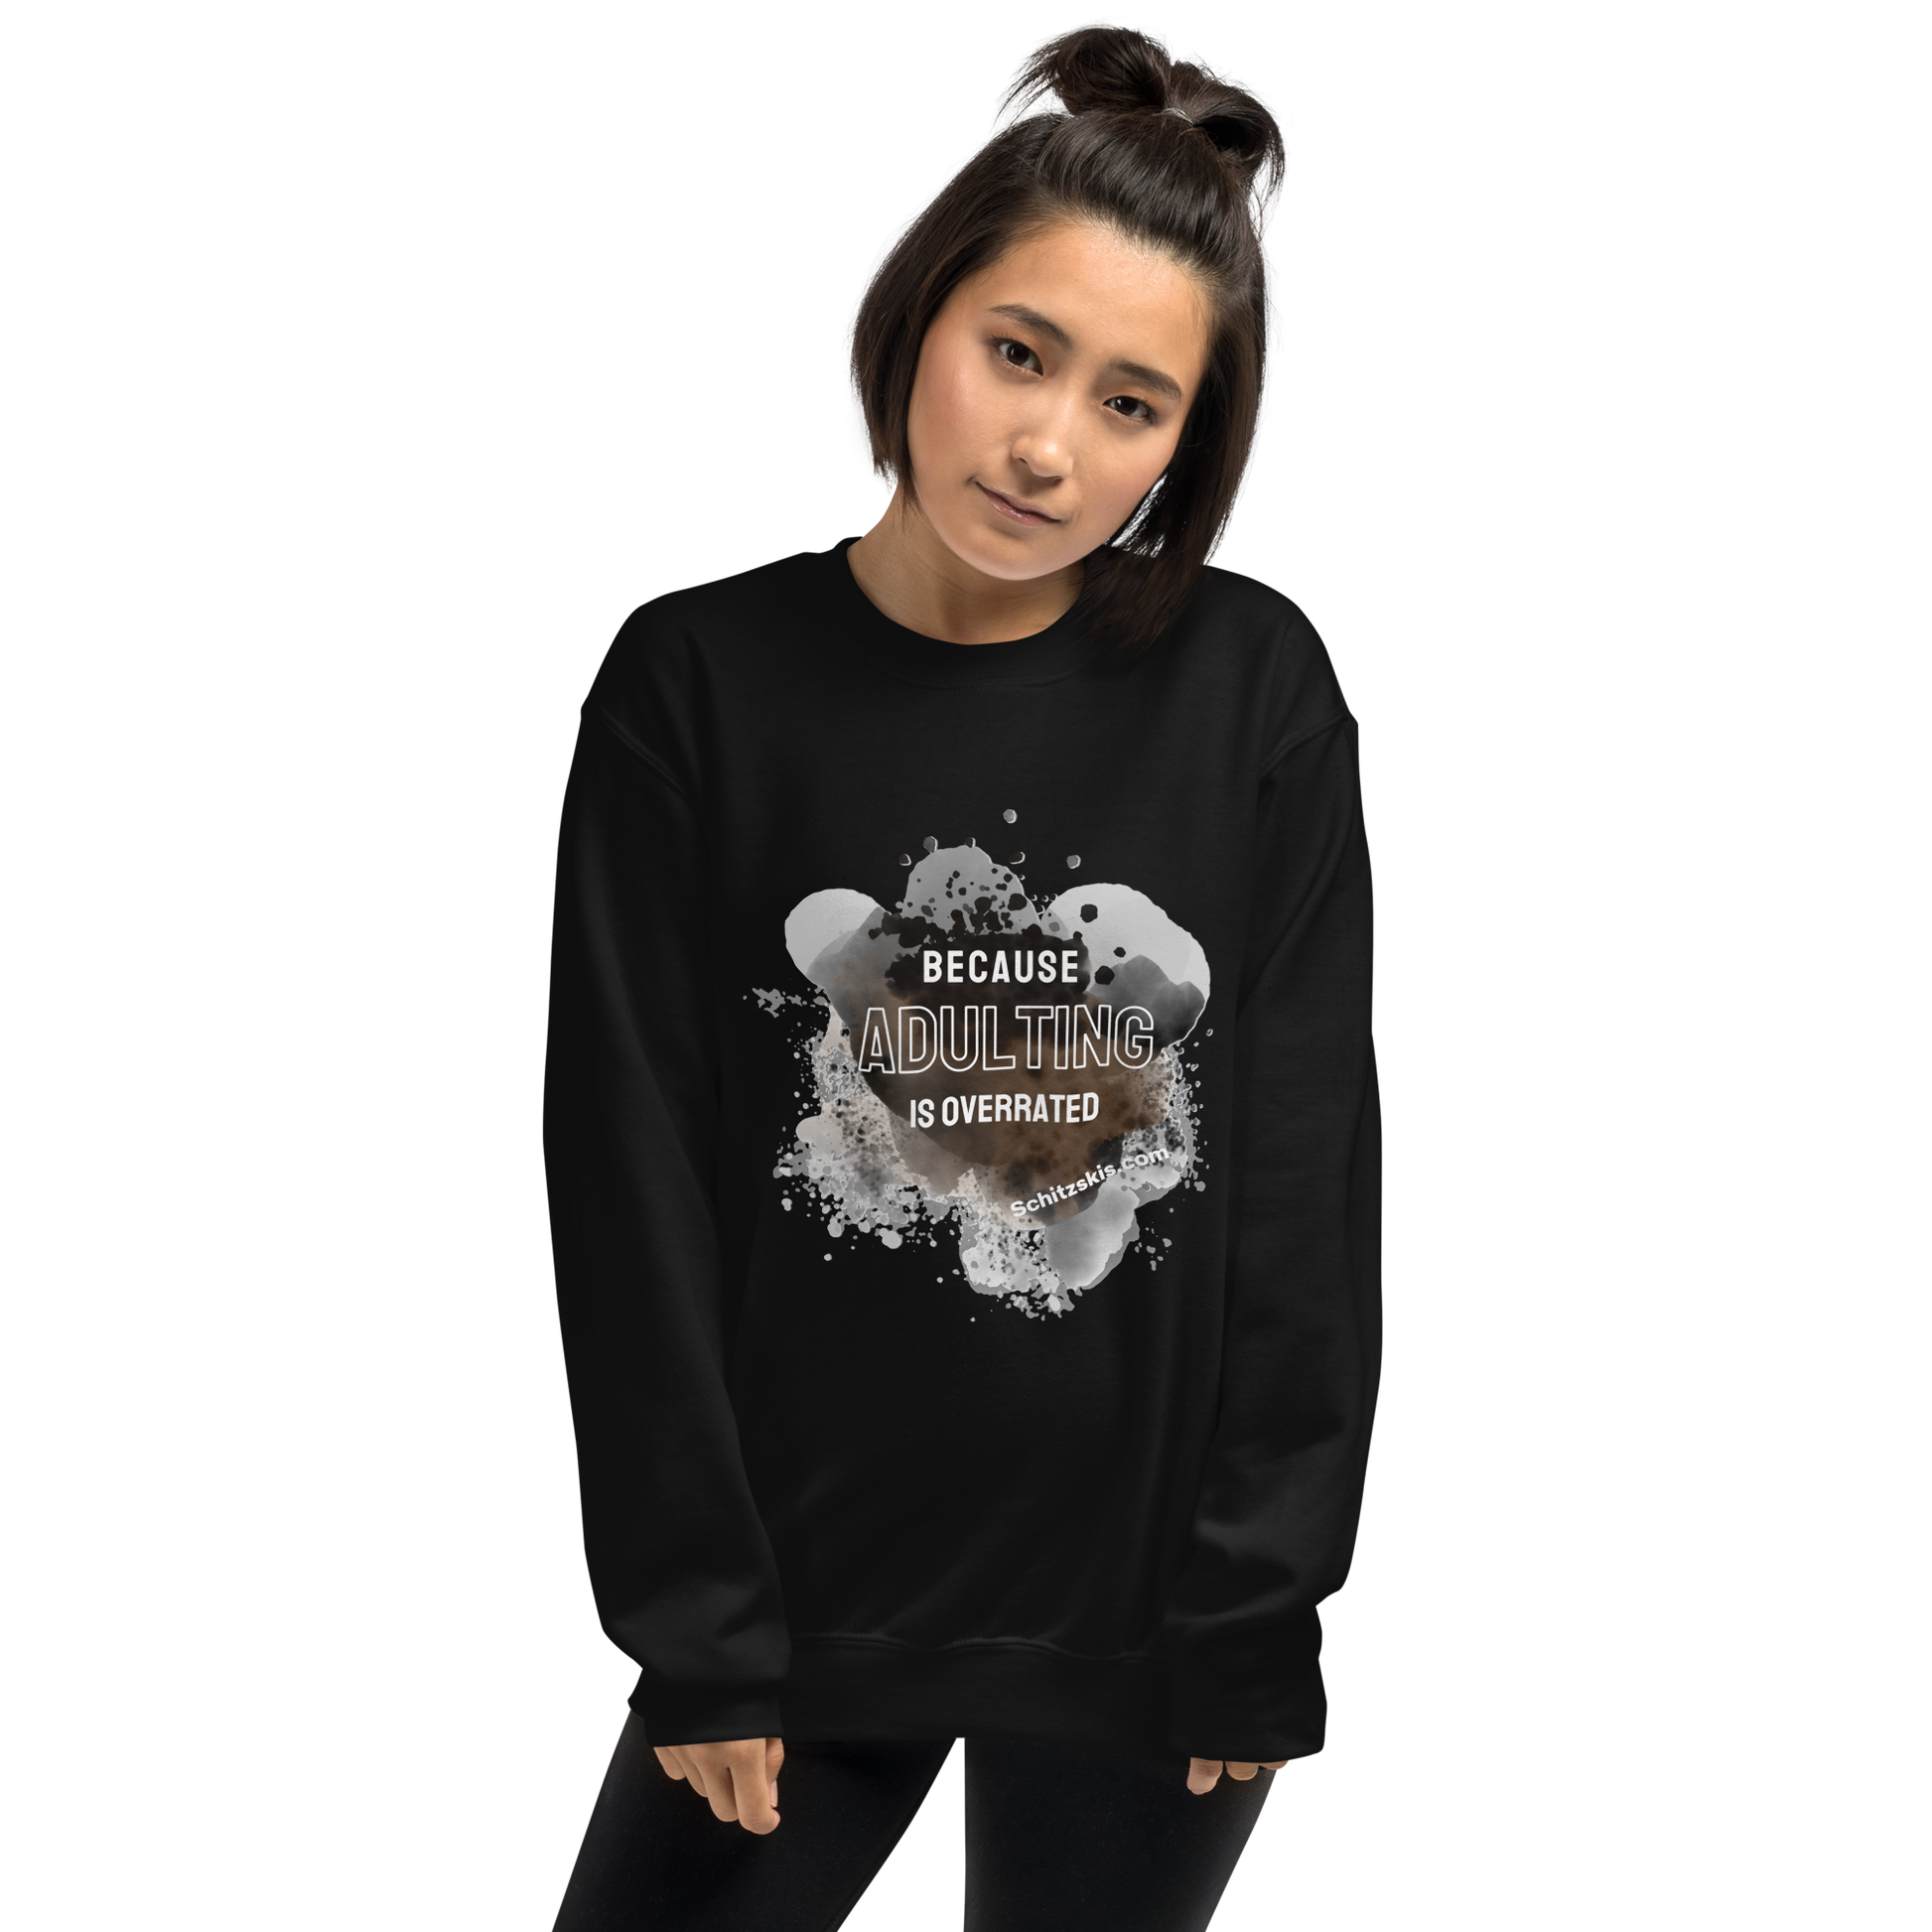 Adulting is Overrated Unisex Sweatshirt in Black color  front view on female model